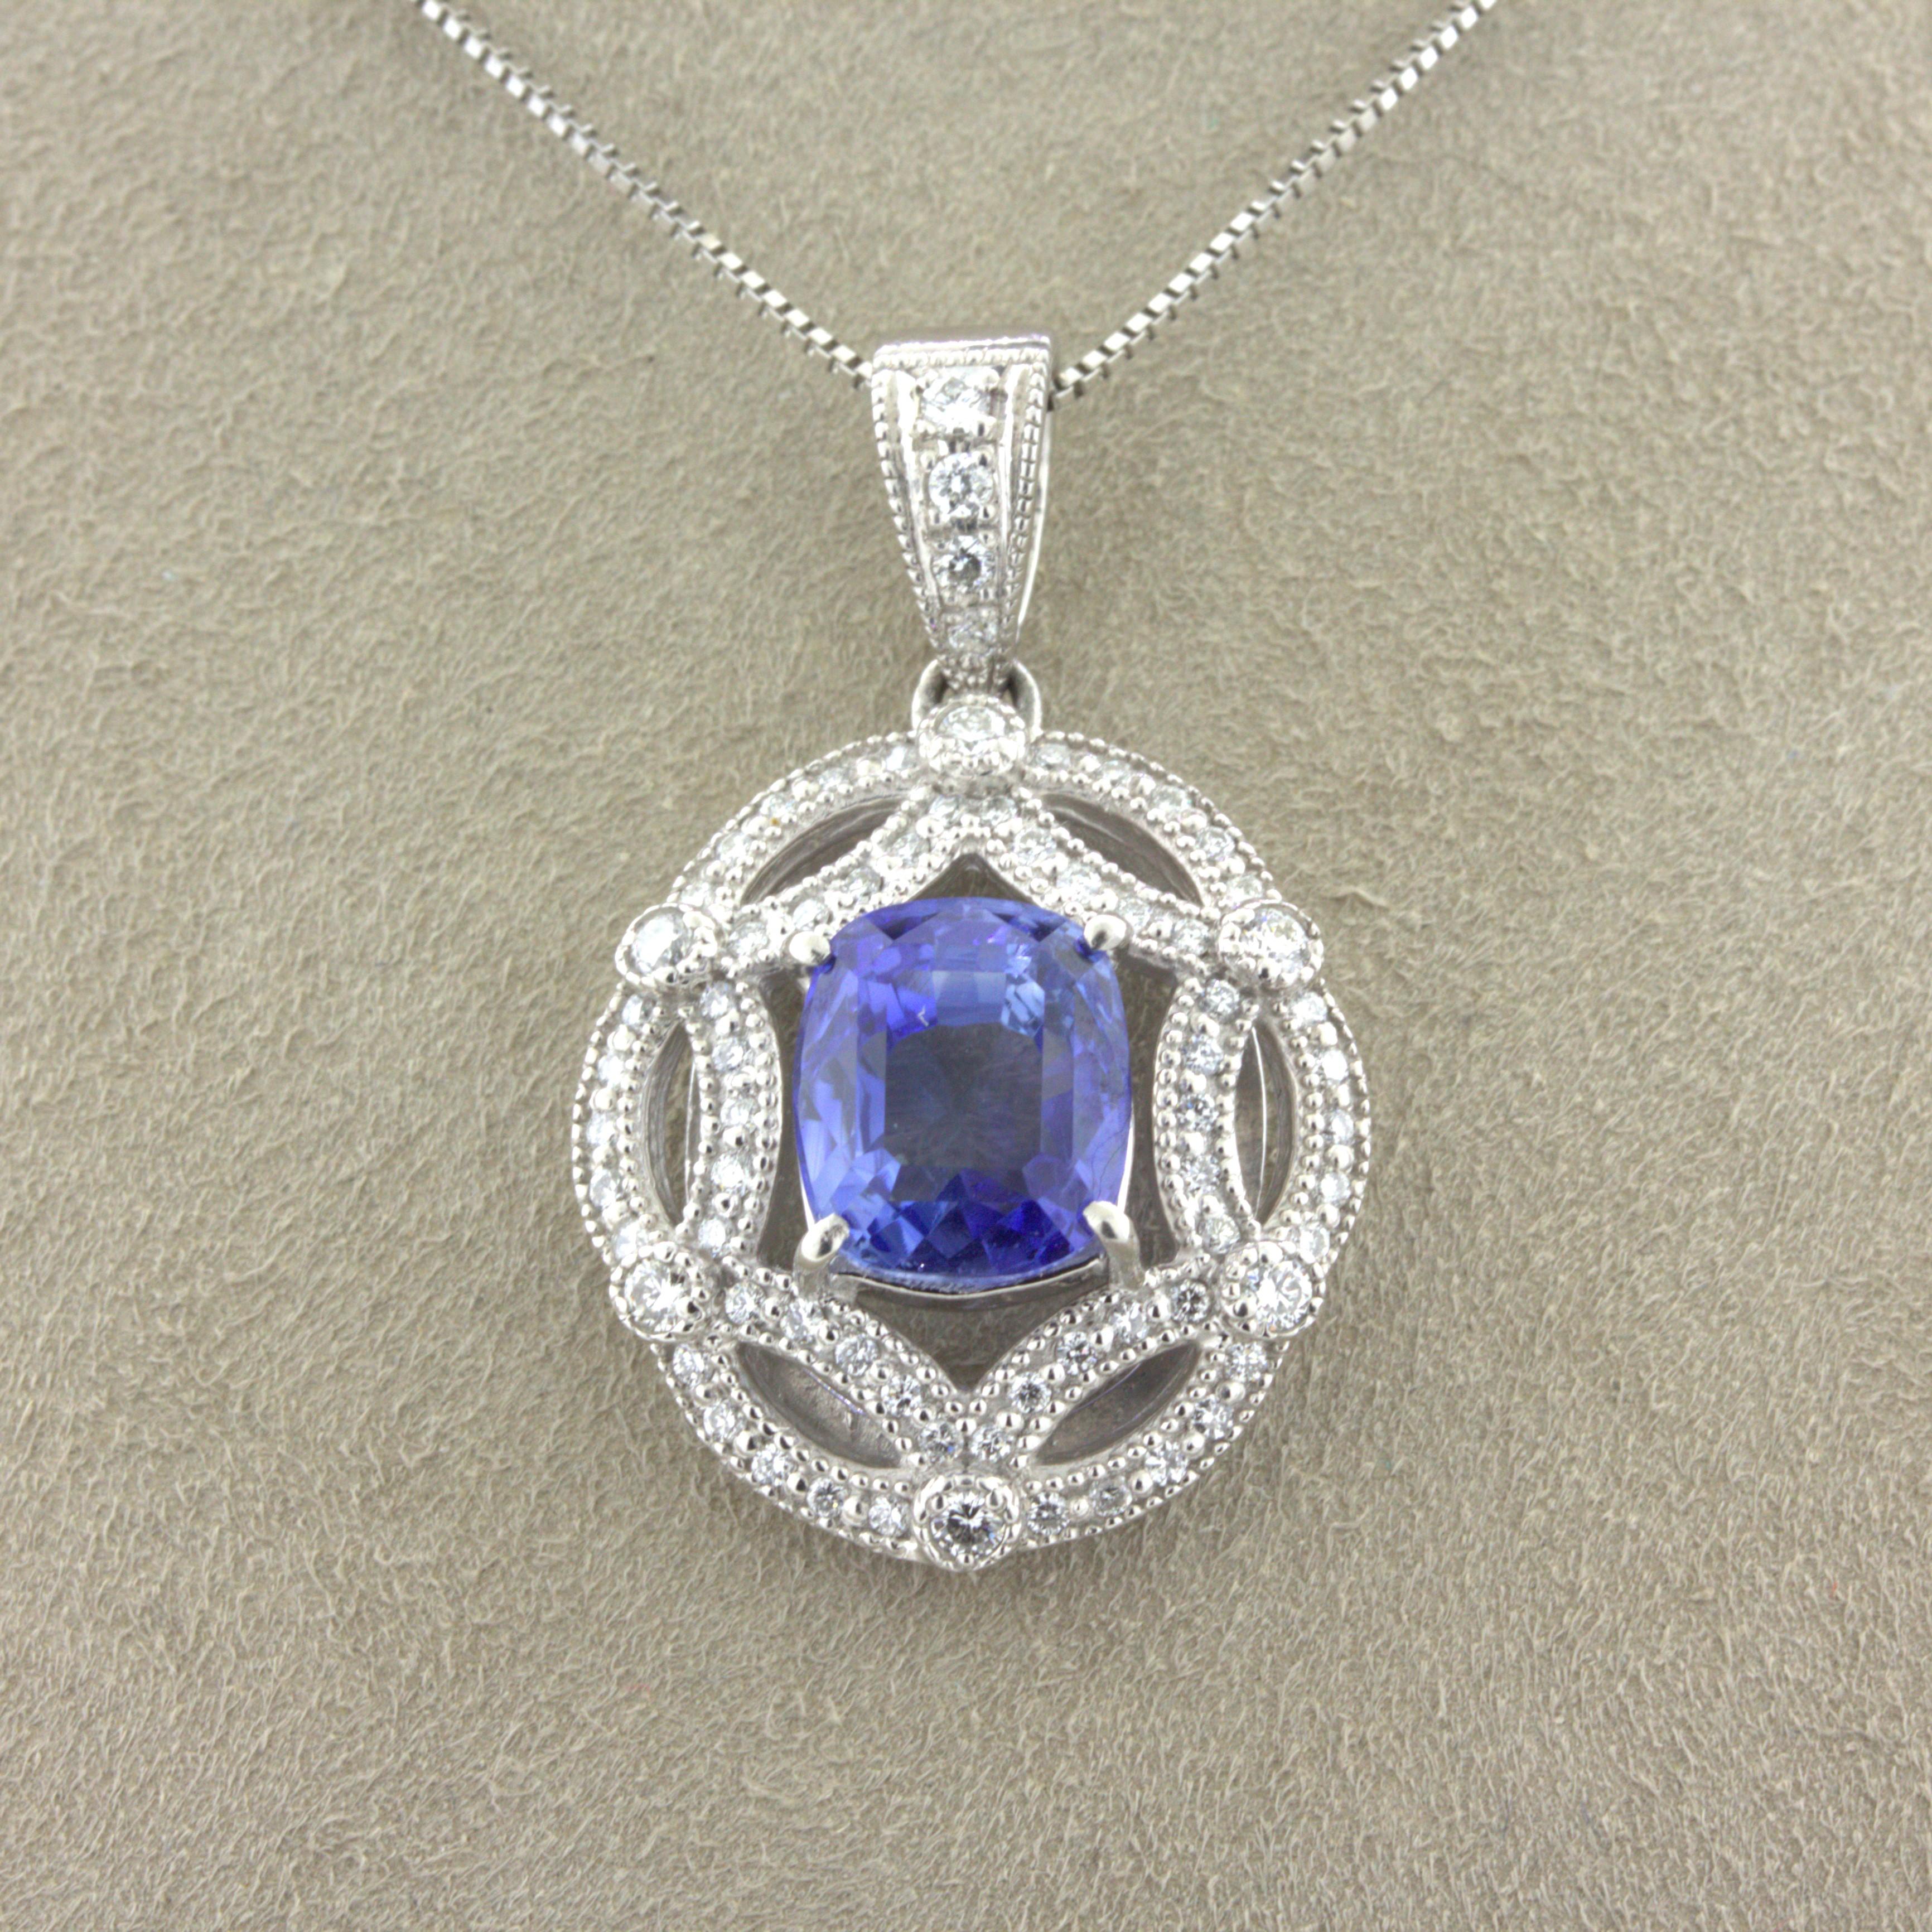 A lovely platinum pendant featuring a 4.80 carat cushion-cut blue sapphire. It has a lovely shape with excellent proportions and a soft open blue color with plenty of brightness and life. It is complemented by 0.56 carats of round brilliant-cut